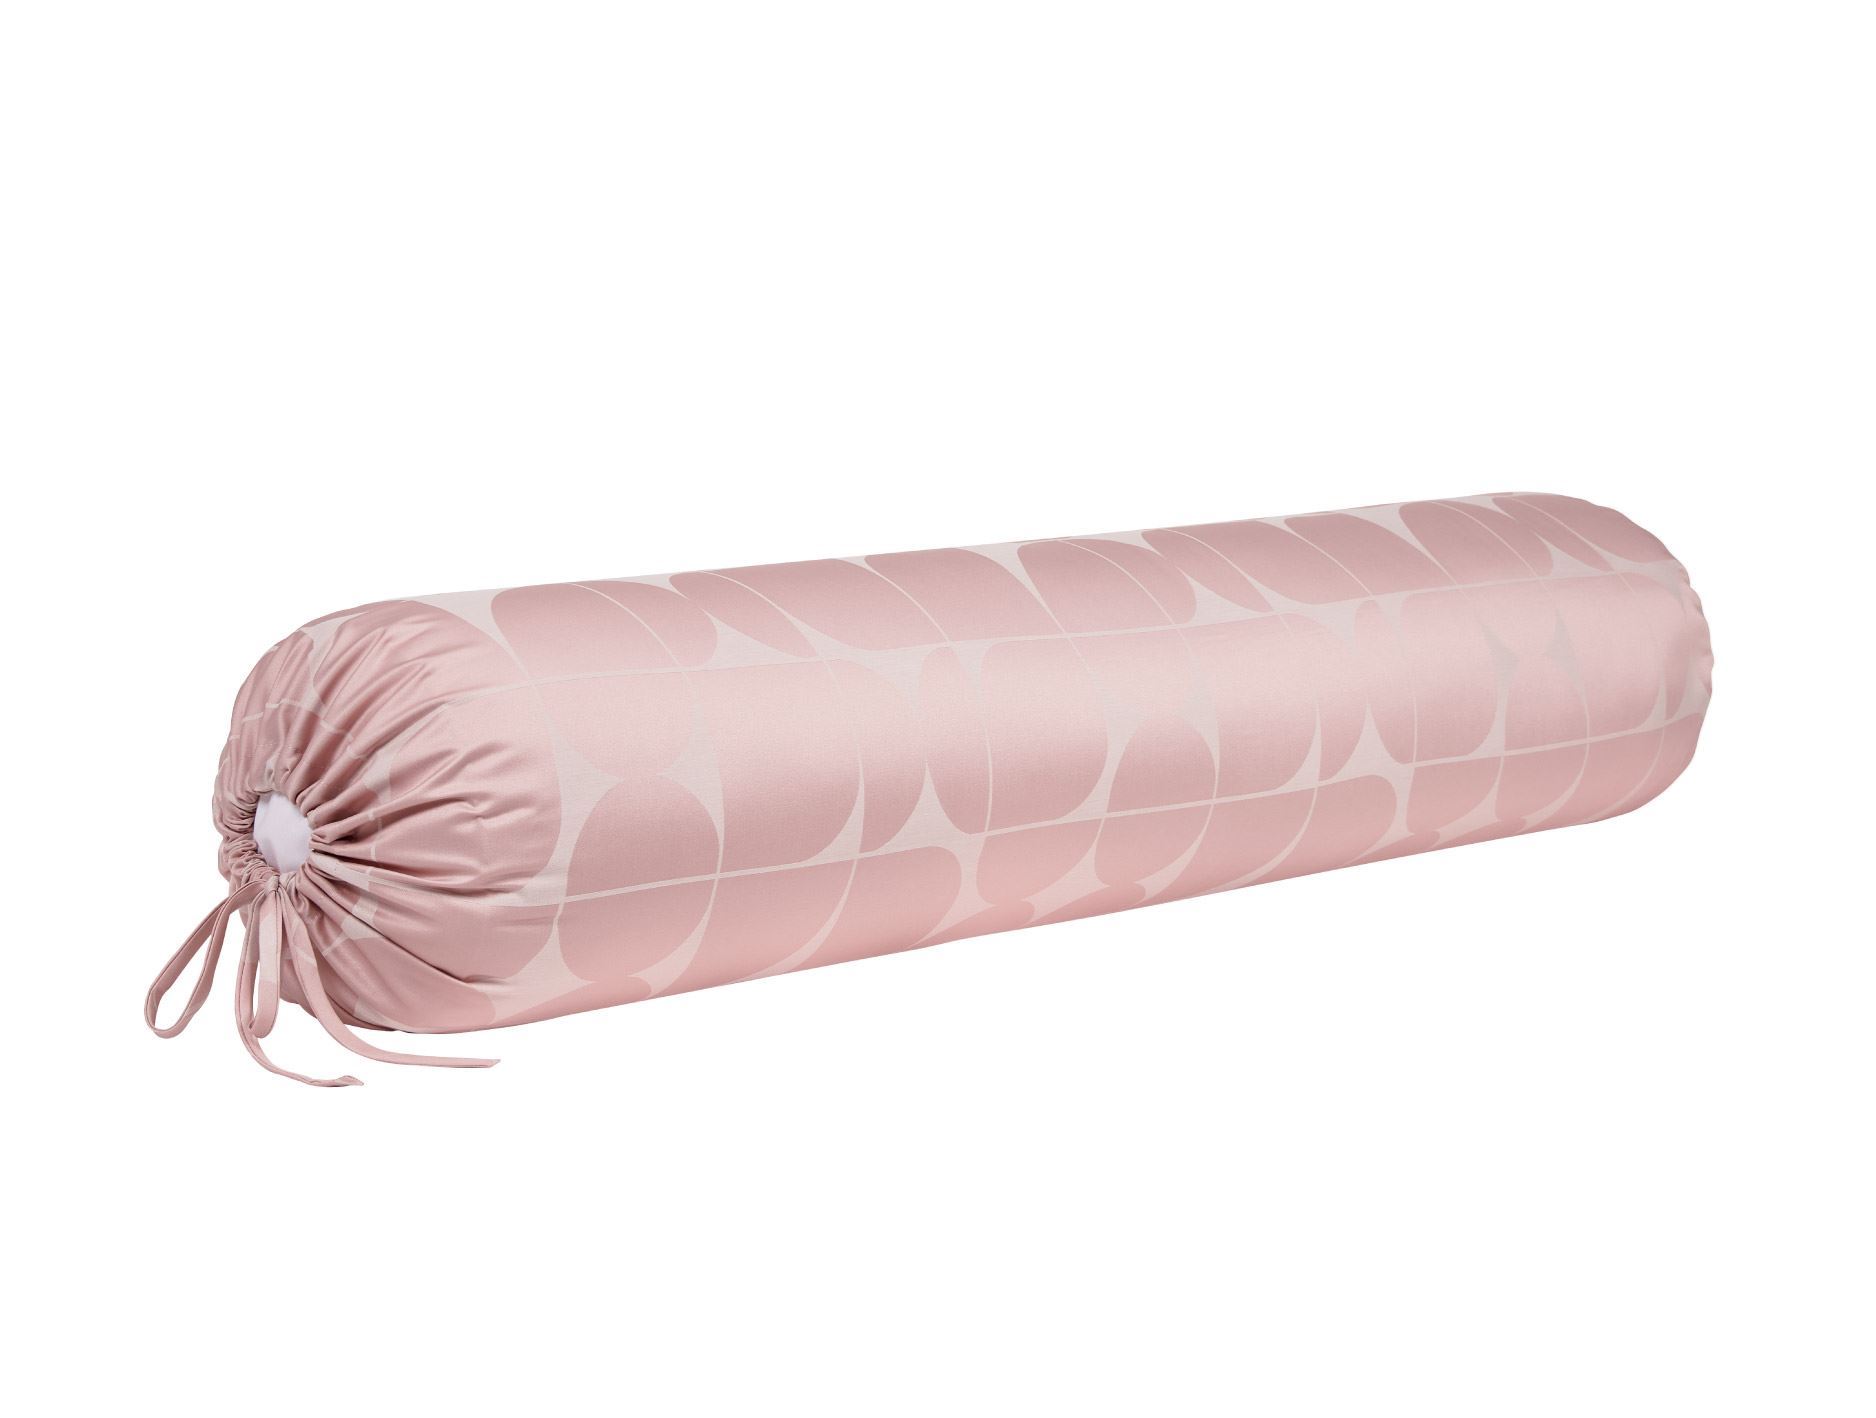 Picture of JUBILY  Bolster cover - 460 thread Series - MILLI  